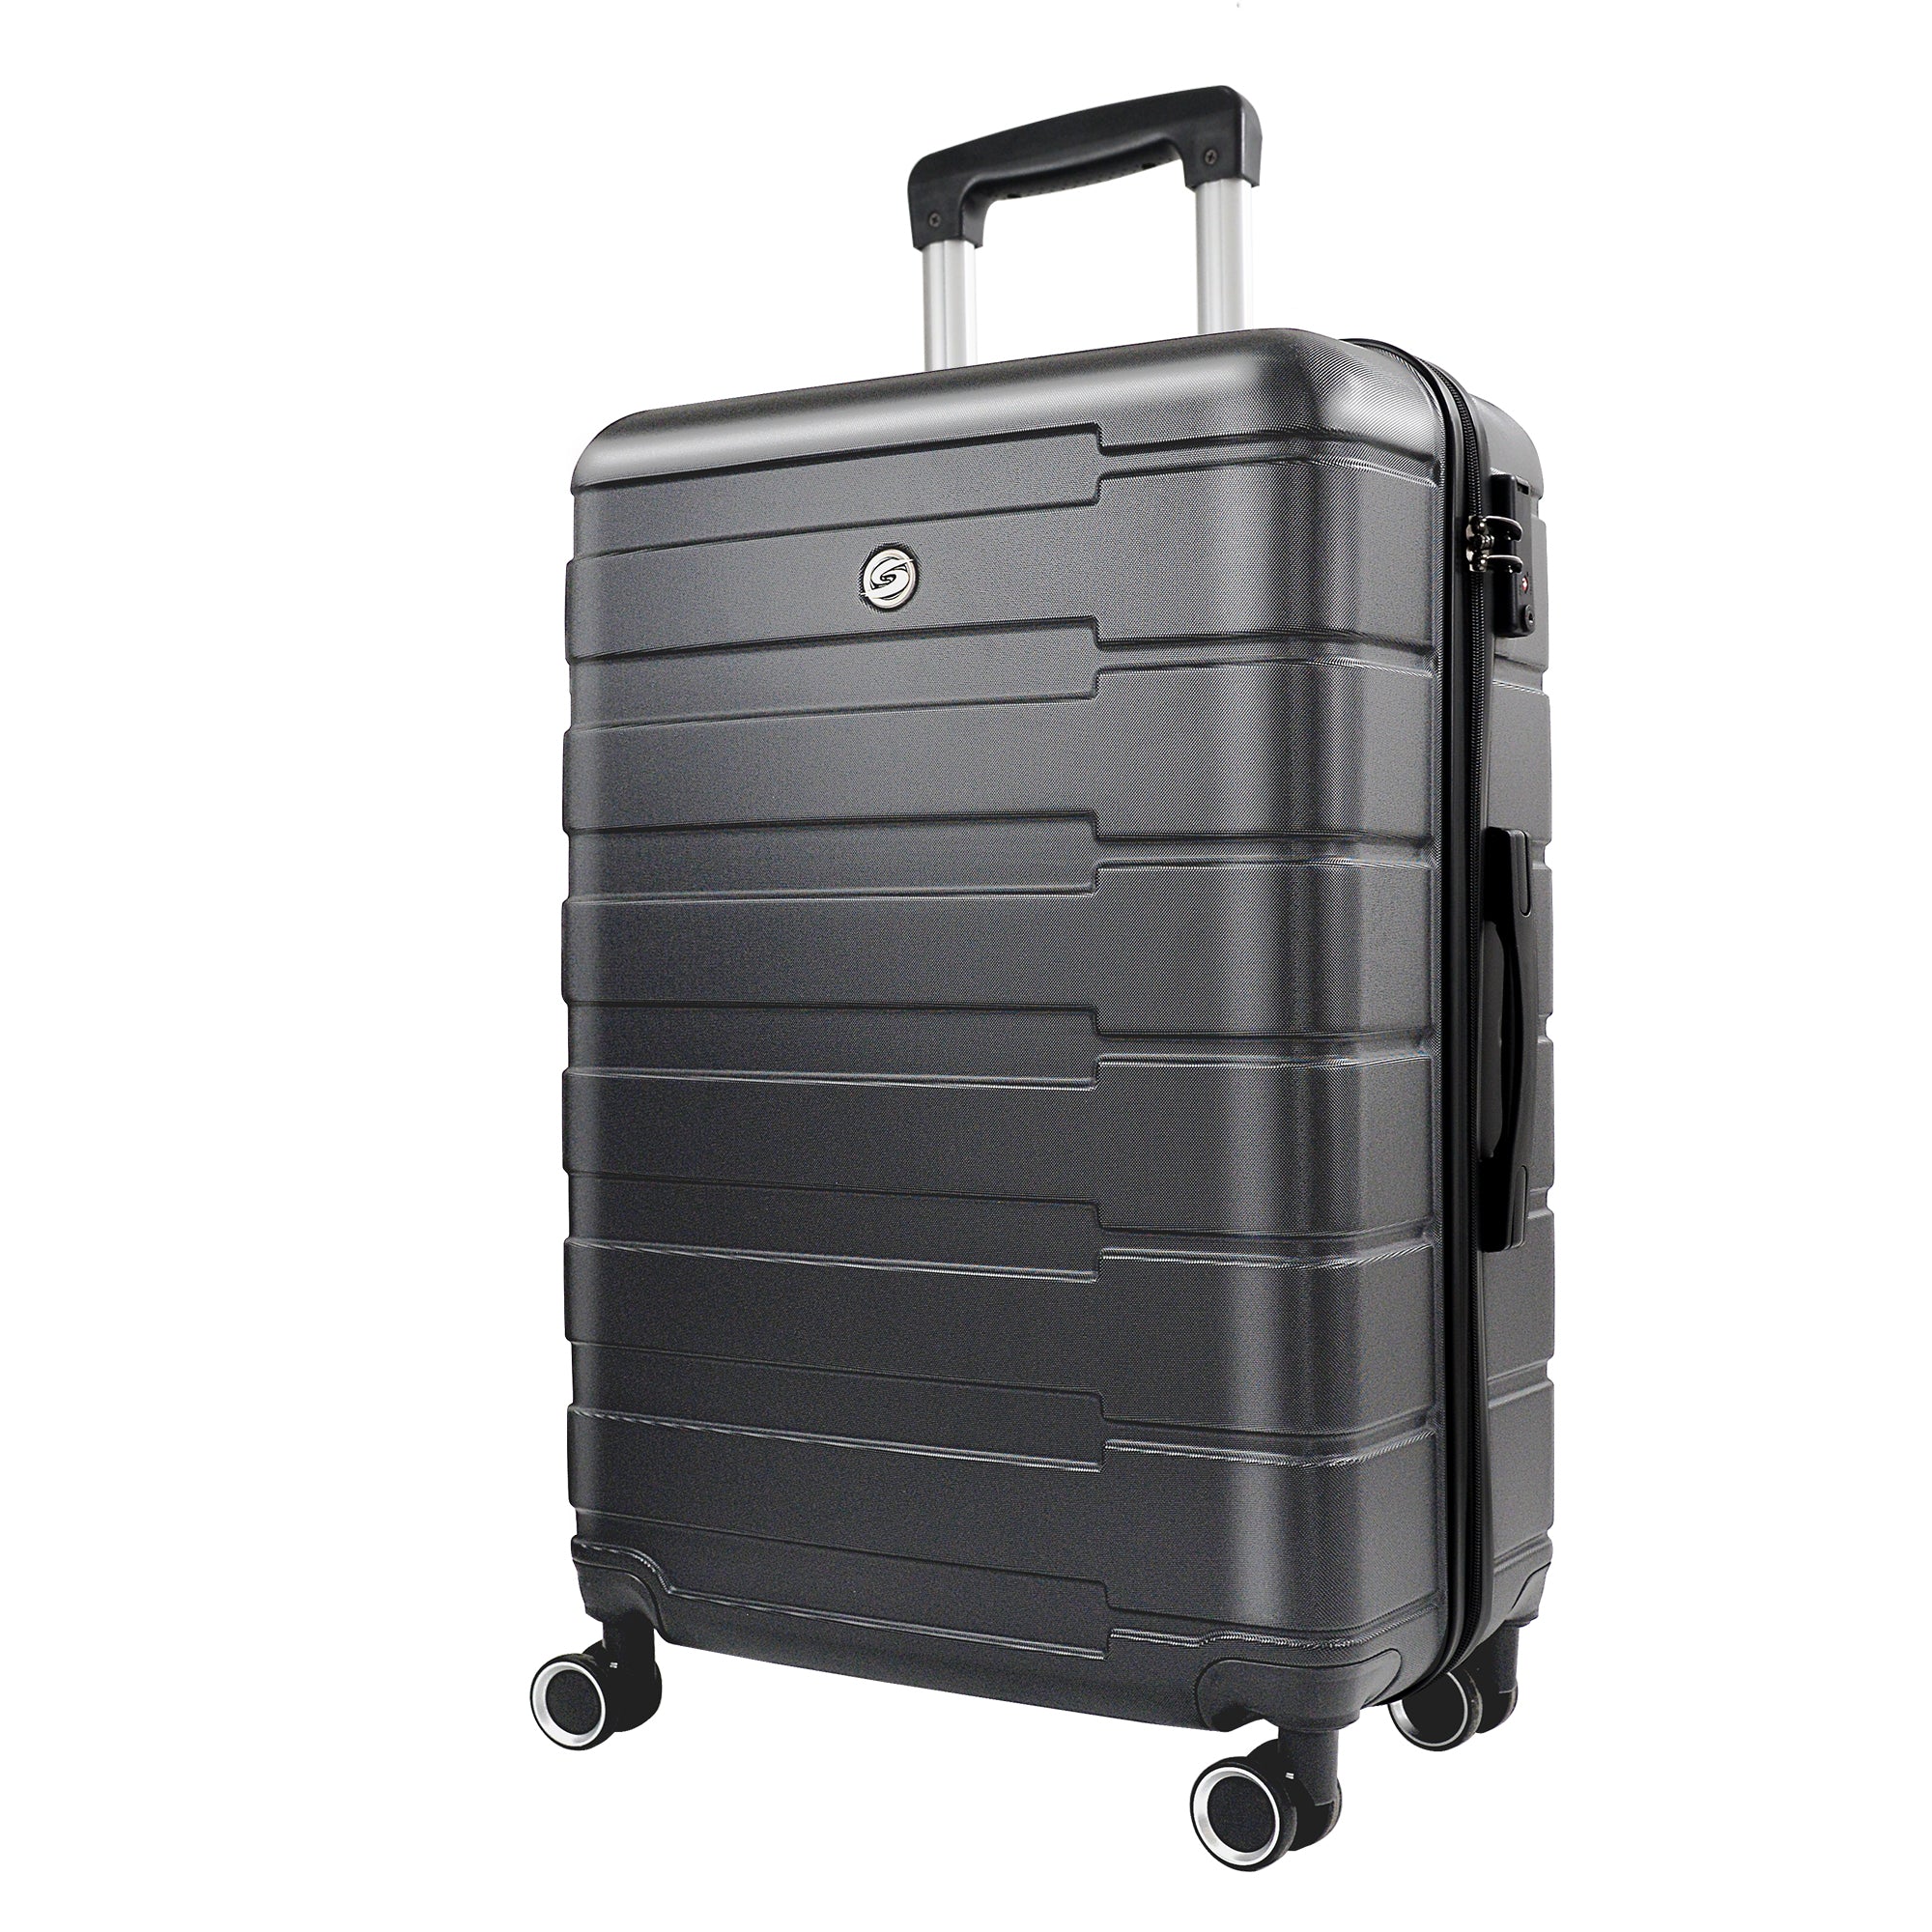 ZNTS 28 Inch, Hard Shell Suitcase Checked luggage, Large Suitcase with  Spinner Wheels, Travel W1625122309